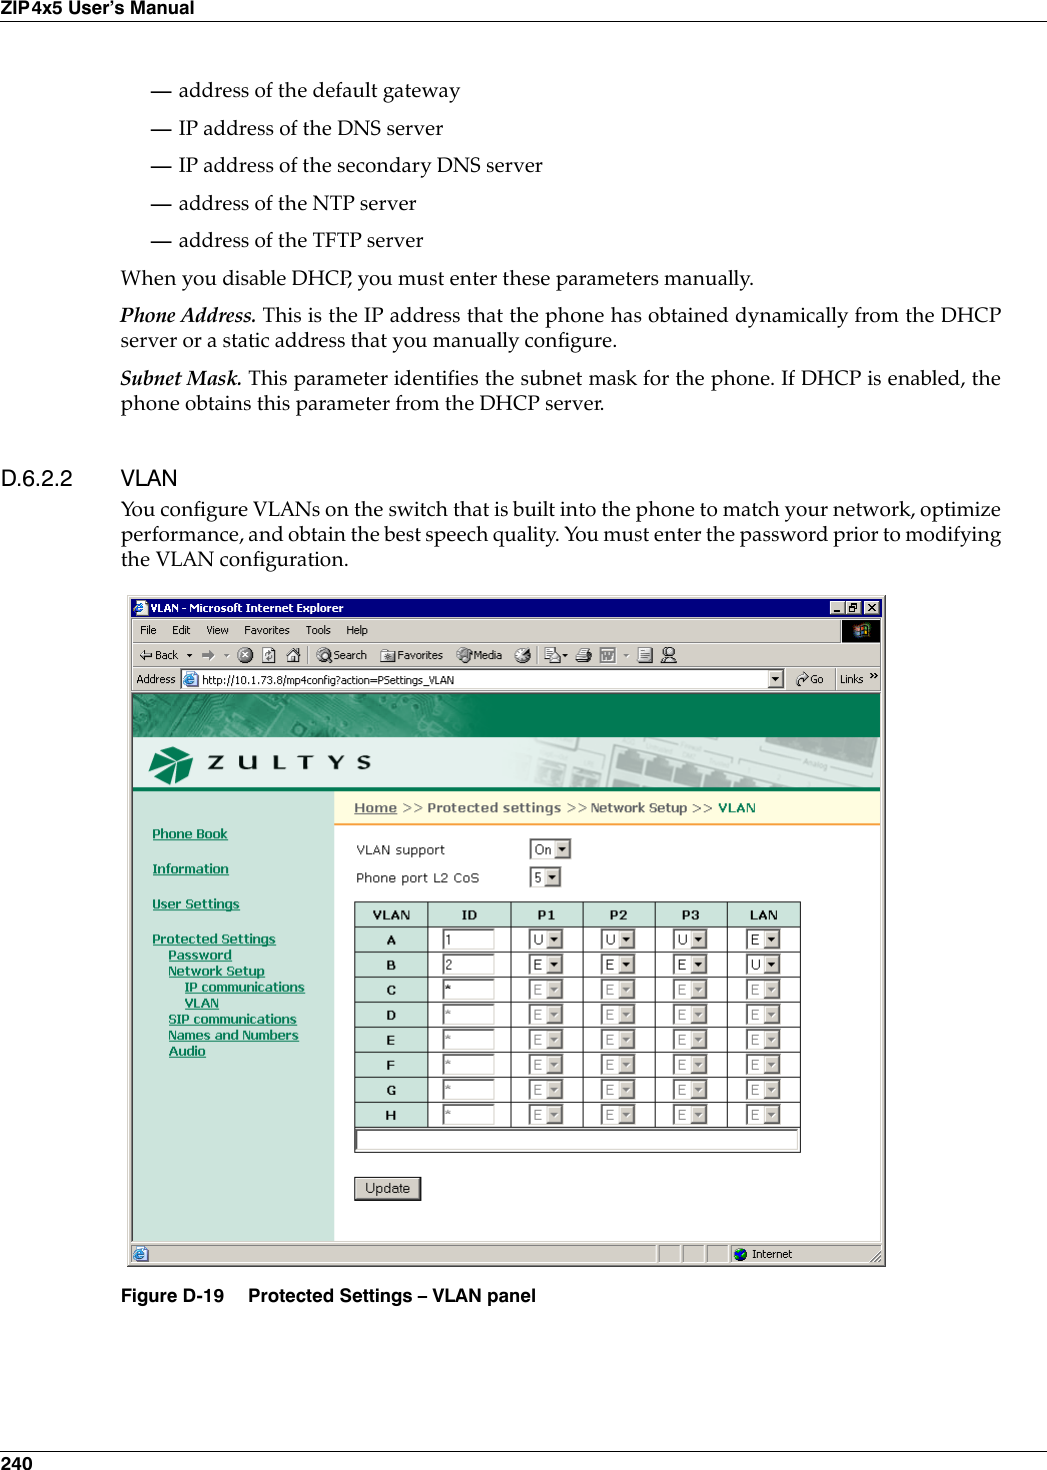 240ZIP4x5 User’s Manual—address of the default gateway—IP address of the DNS server—IP address of the secondary DNS server—address of the NTP server—address of the TFTP serverWhen you disable DHCP, you must enter these parameters manually.Phone Address. This is the IP address that the phone has obtained dynamically from the DHCPserver or a static address that you manually configure.Subnet Mask. This parameter identifies the subnet mask for the phone. If DHCP is enabled, thephone obtains this parameter from the DHCP server.D.6.2.2 VLANYou configure VLANs on the switch that is built into the phone to match your network, optimizeperformance, and obtain the best speech quality. You must enter the password prior to modifyingthe VLAN configuration.Figure D-19 Protected Settings – VLAN panel